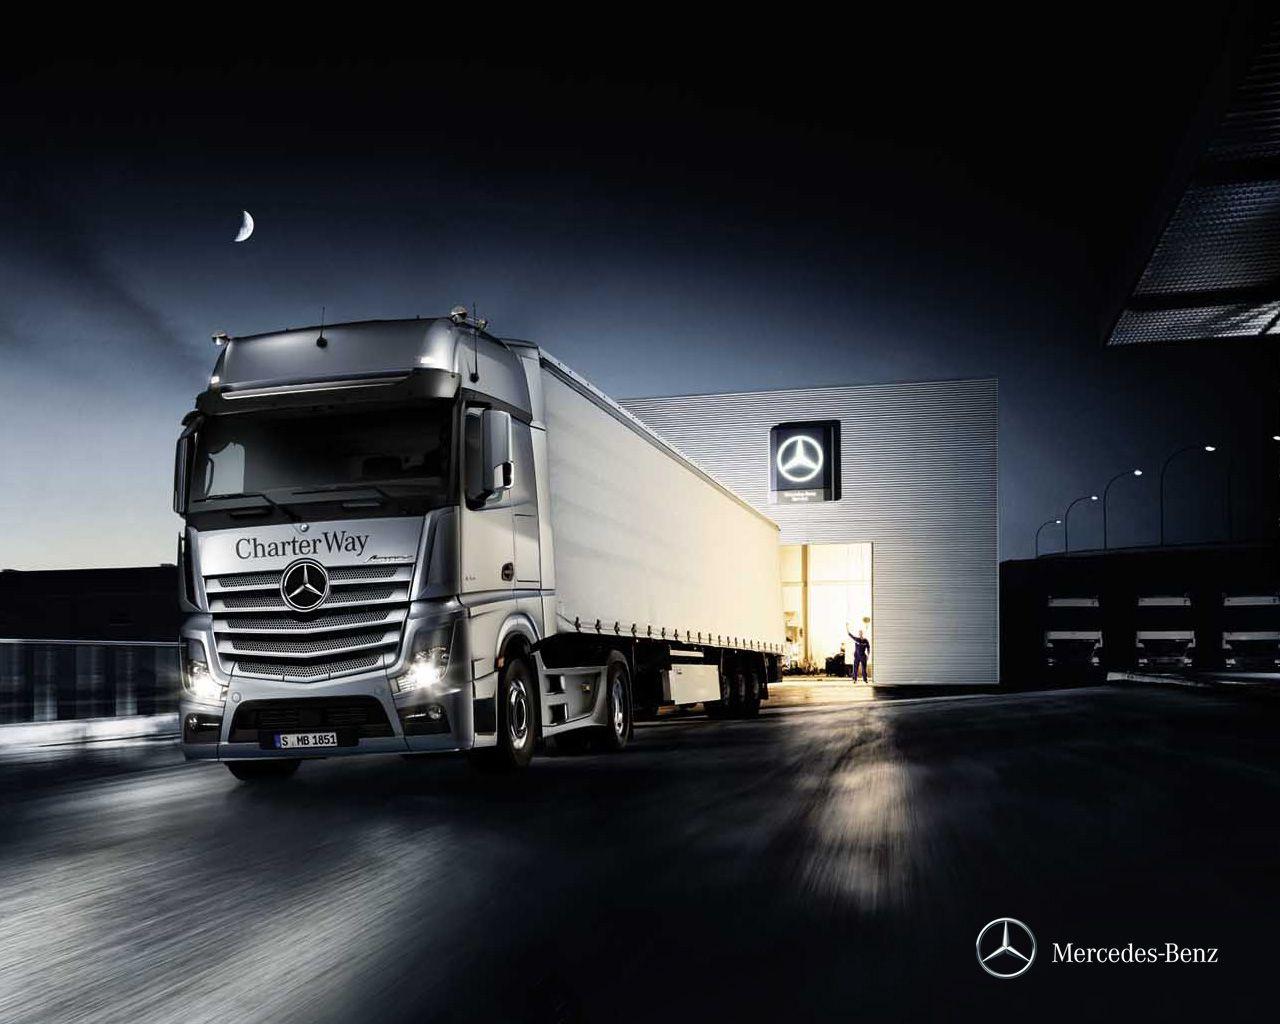 Mercedes‑Benz Actros Wooden Replica Created To Welcome New Year